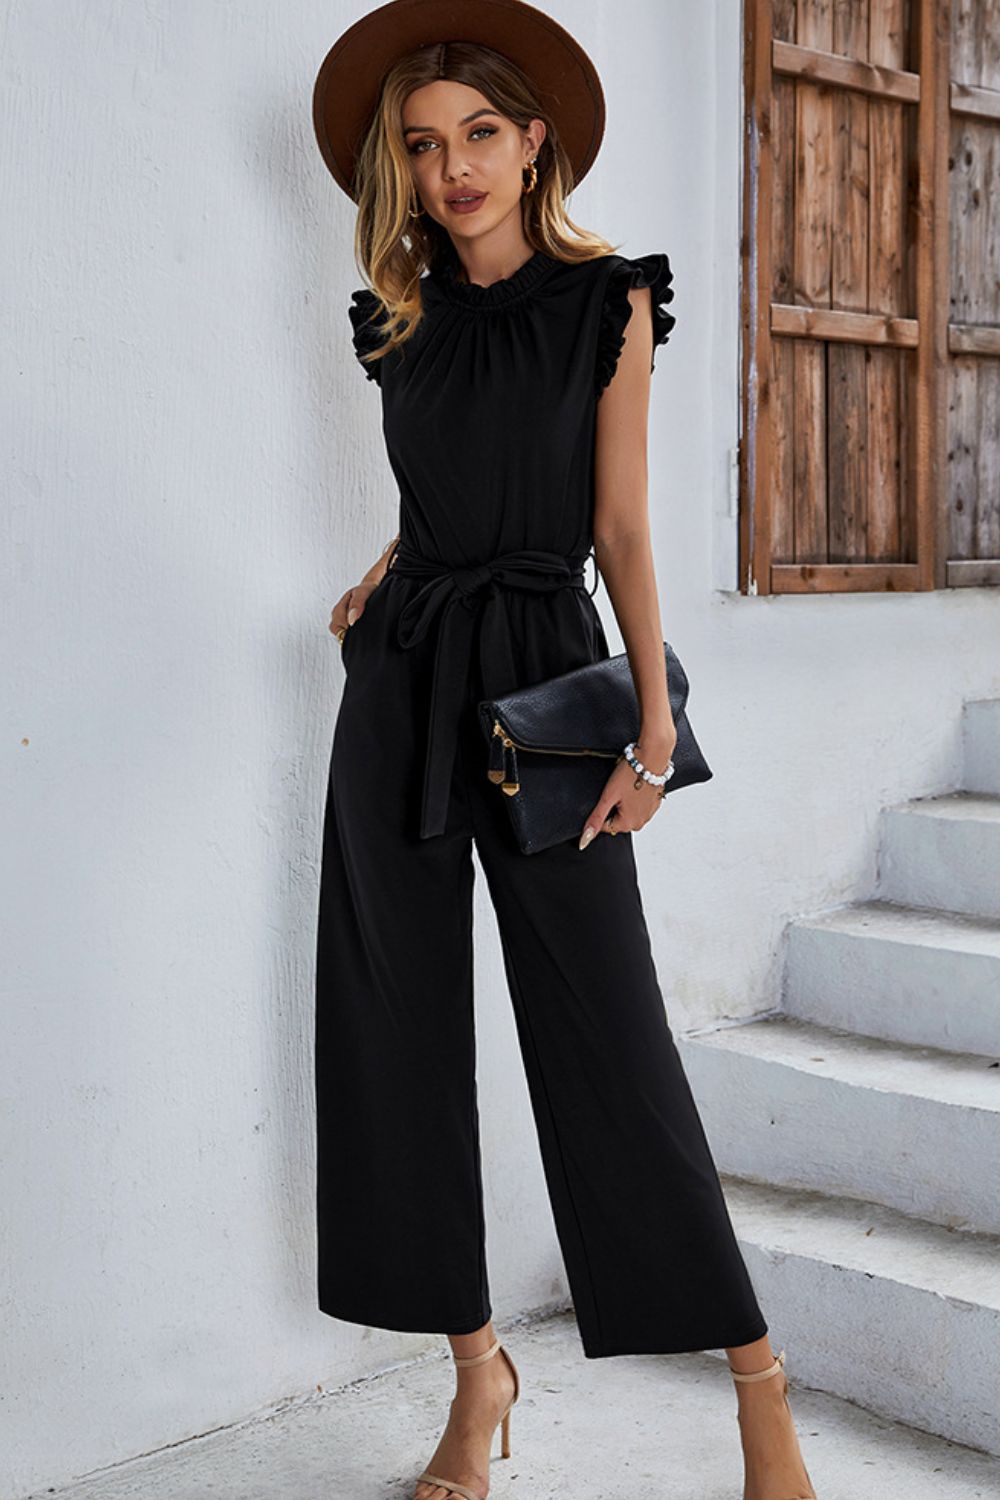 Butterfly Sleeve Tie Waist Jumpsuit  Sunset and Swim Black S 